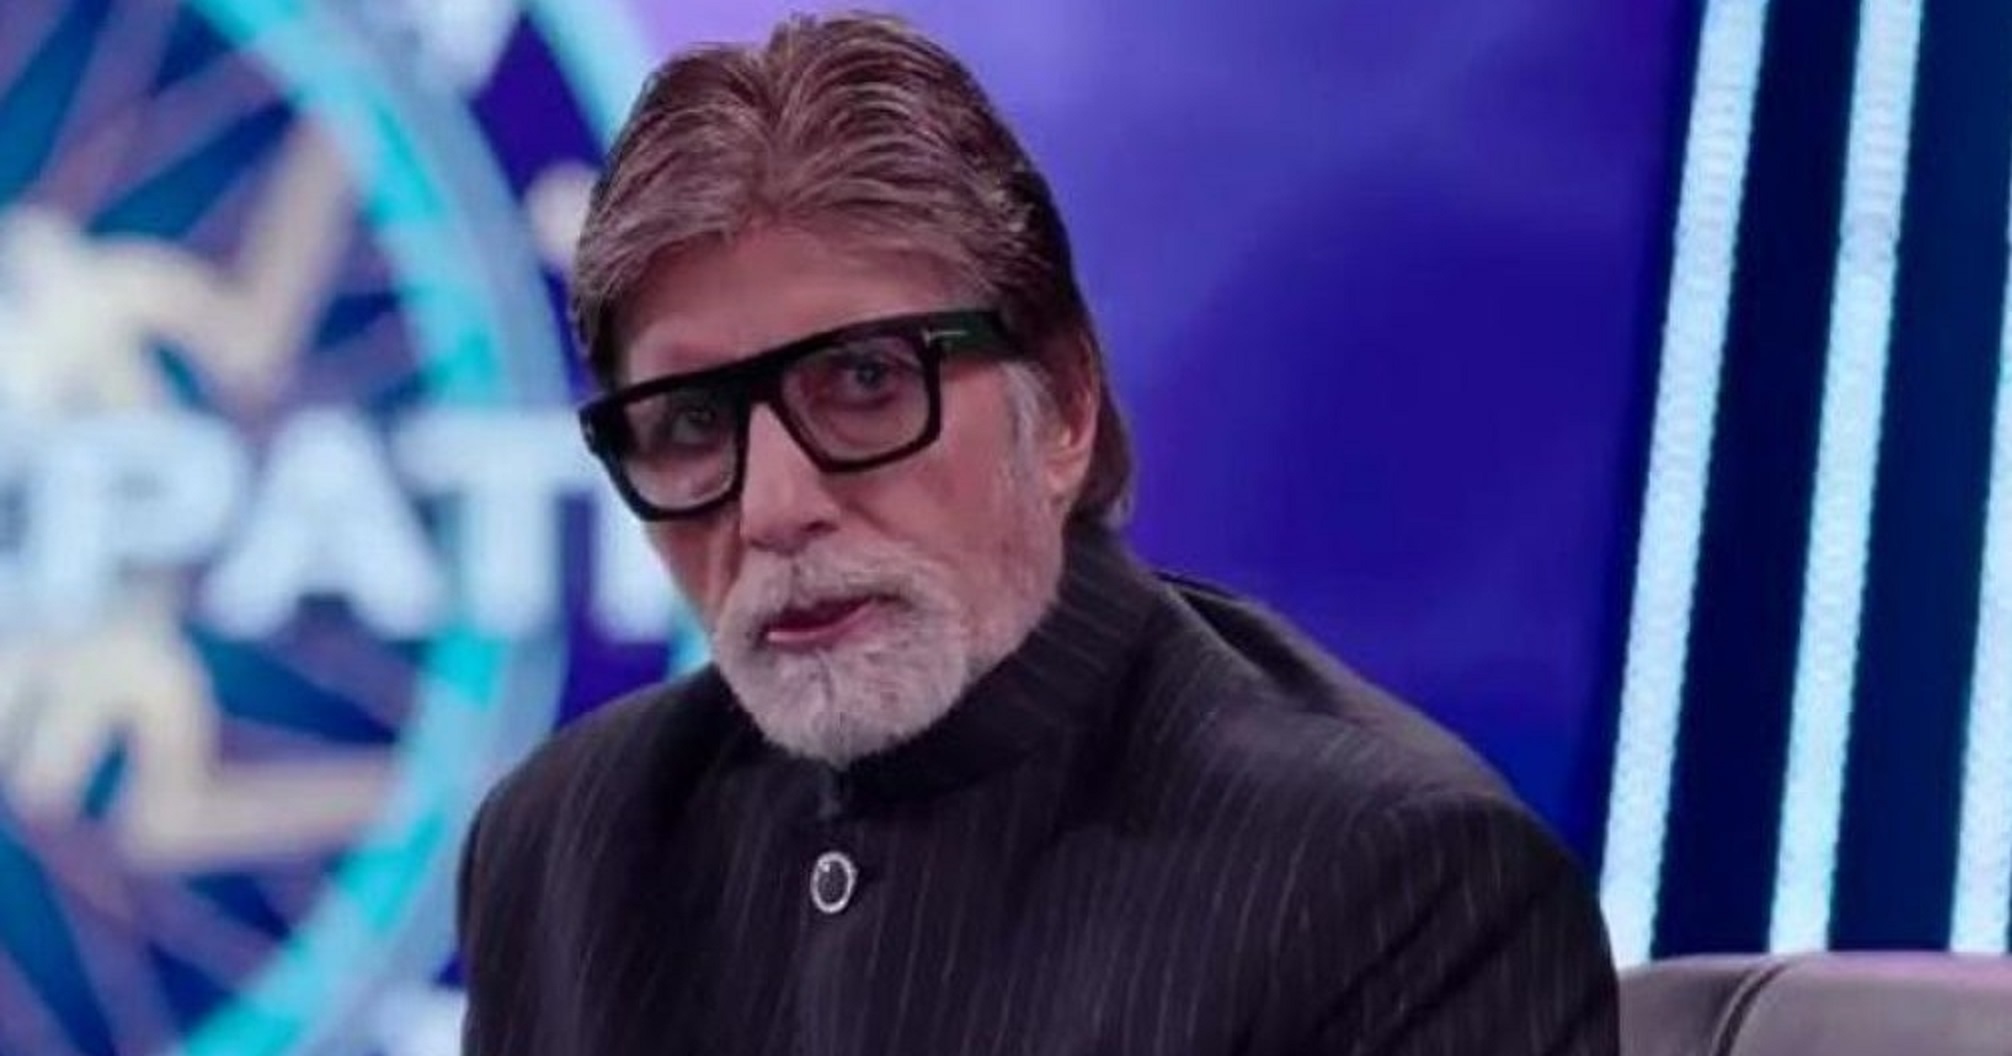 Amitabh Bachchan Responds After Troll Calls Him ‘Buddhe’: “I pray no one insults you in your old age”